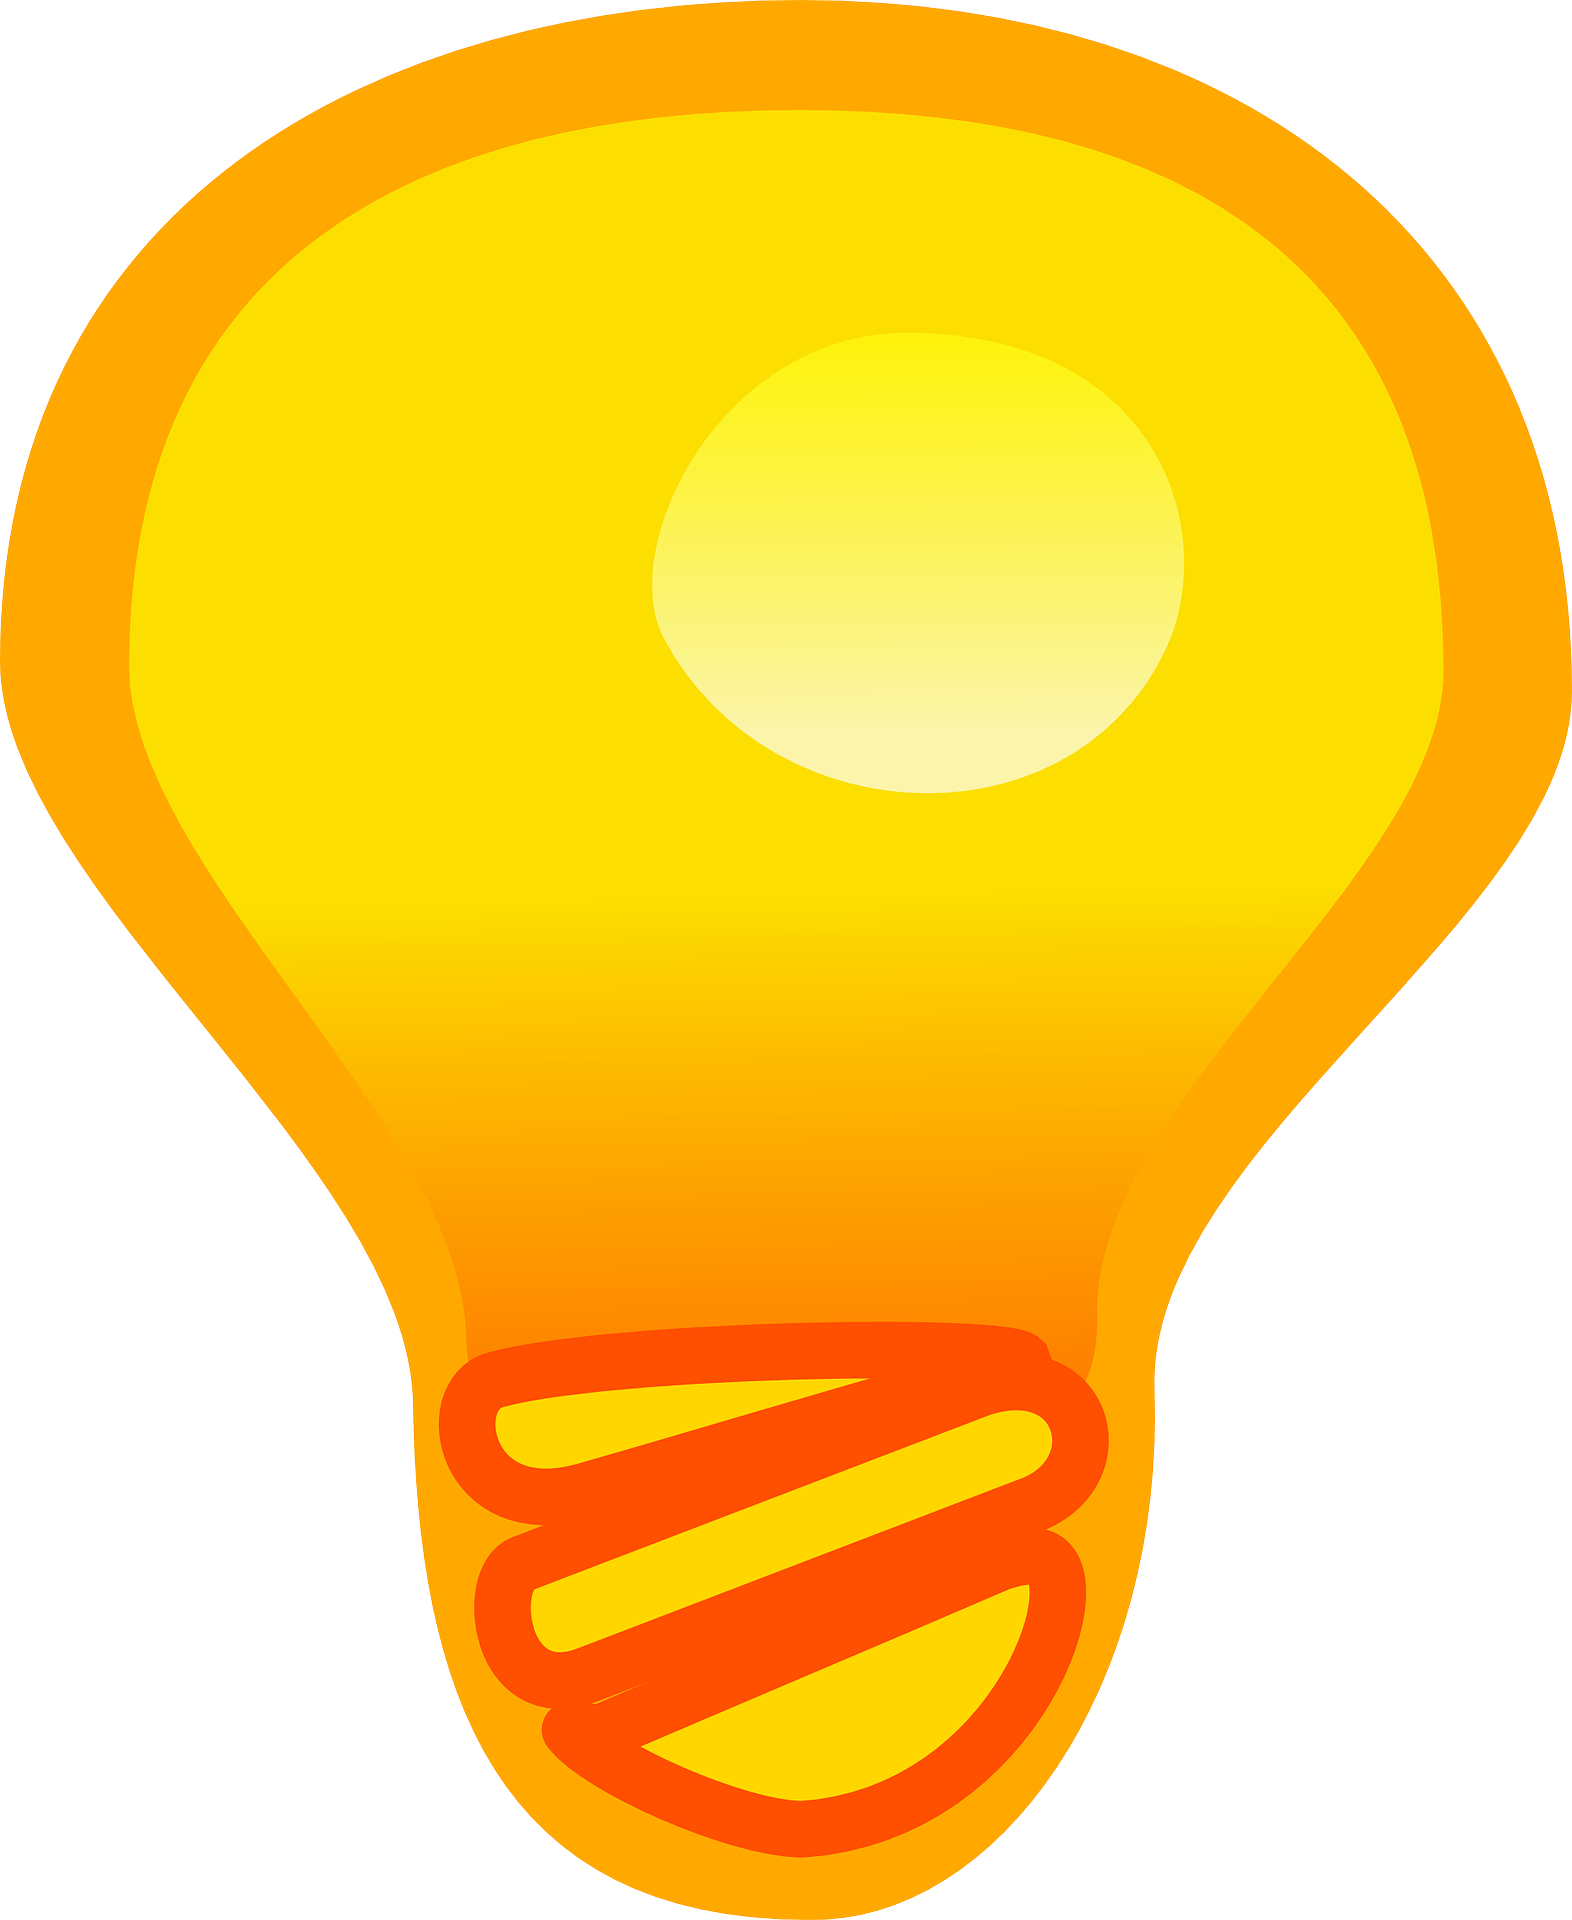 A Light Bulb With A Yellow Light